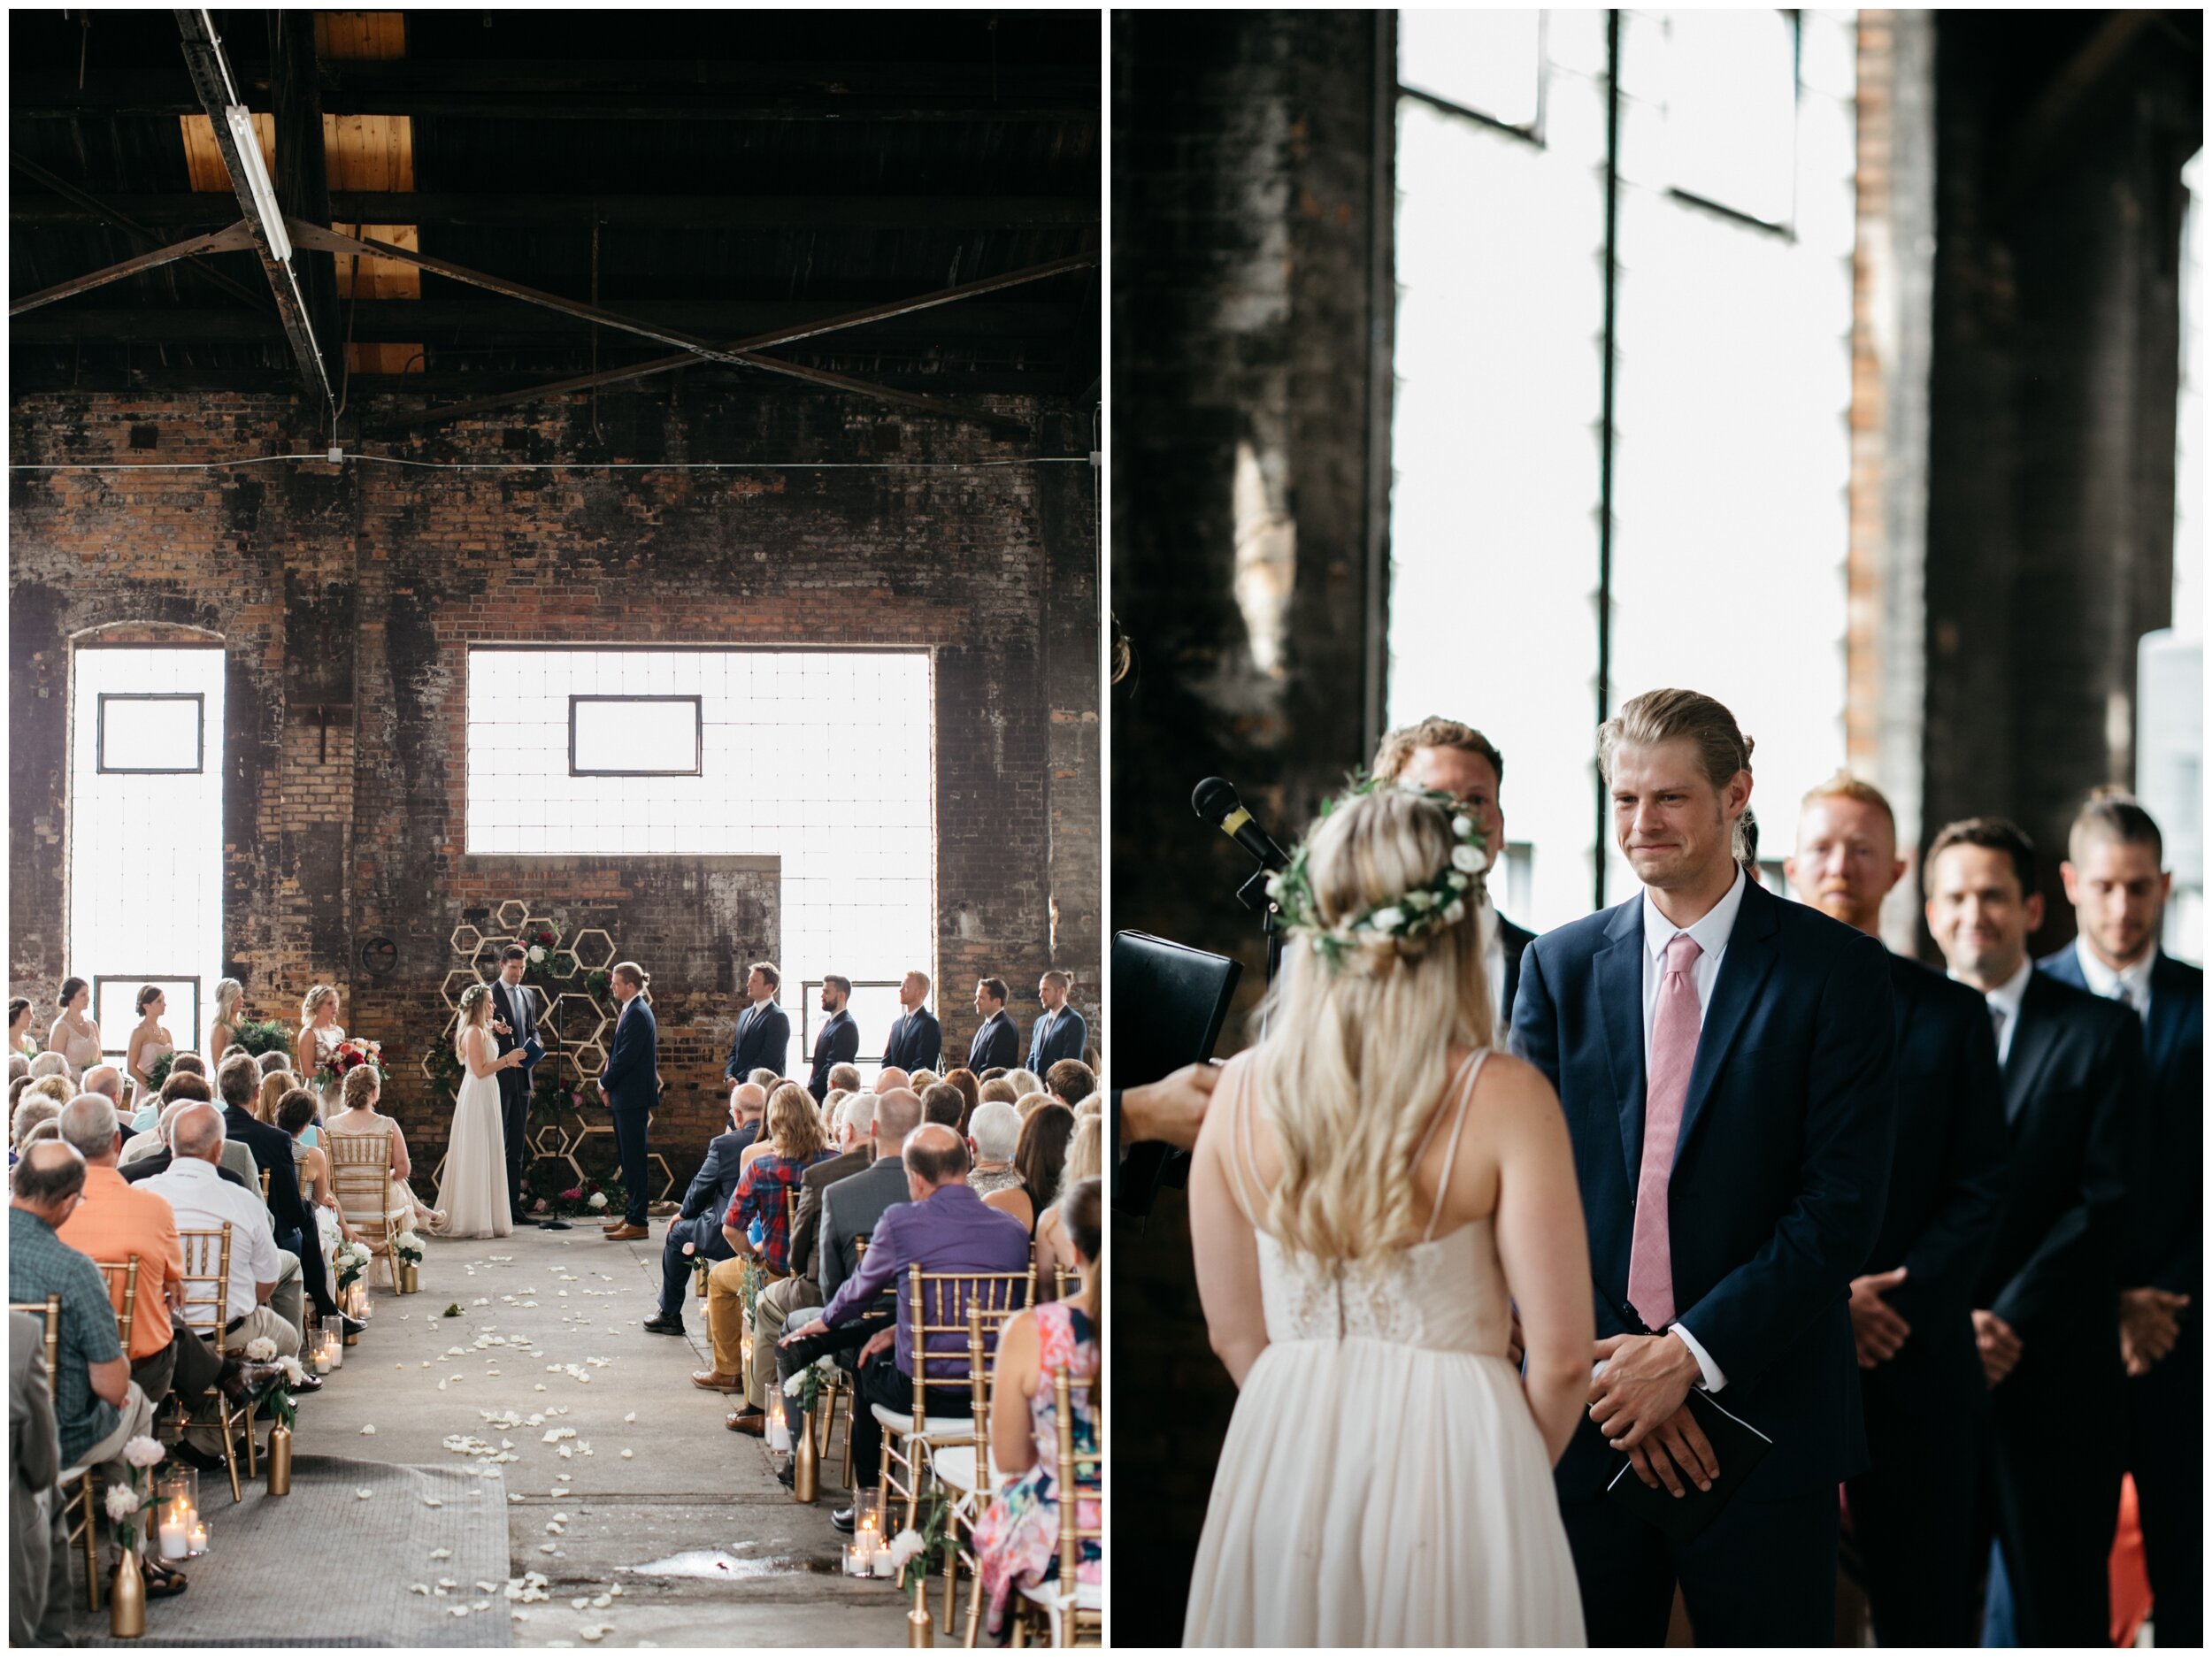 Bride and groom saying vows during wedding ceremony in Blacksmith Main venue at the Northern Pacific Center in Brainerd, Minnesota